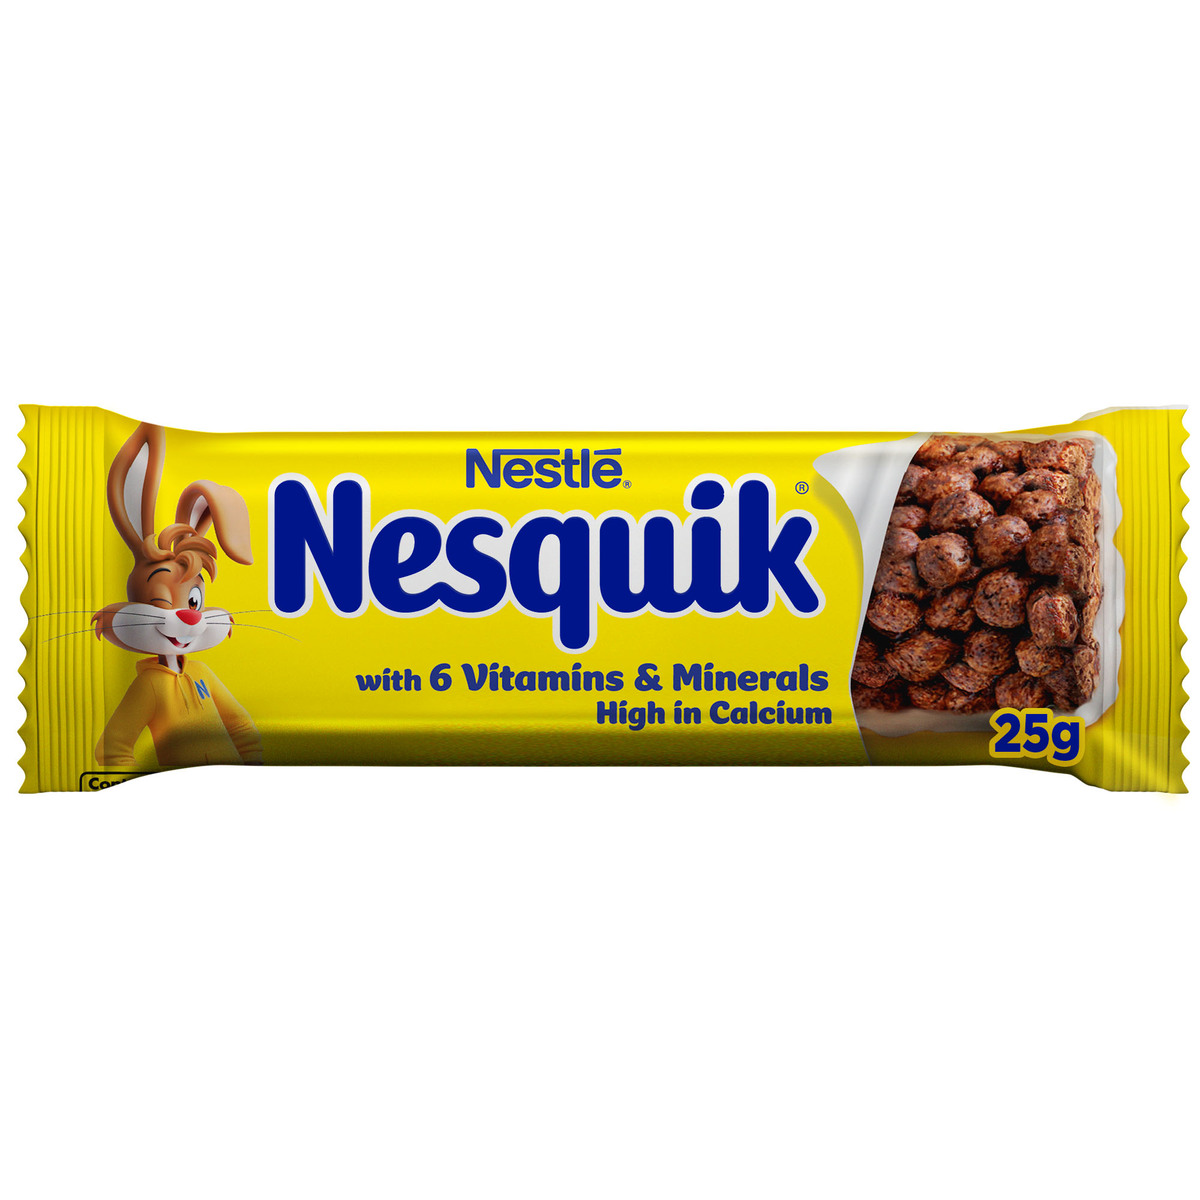 Buy Nestle Nesquik Chocolate Cereal Bar 25 g Online at Best Price | Cereal Bars | Lulu Egypt in Kuwait